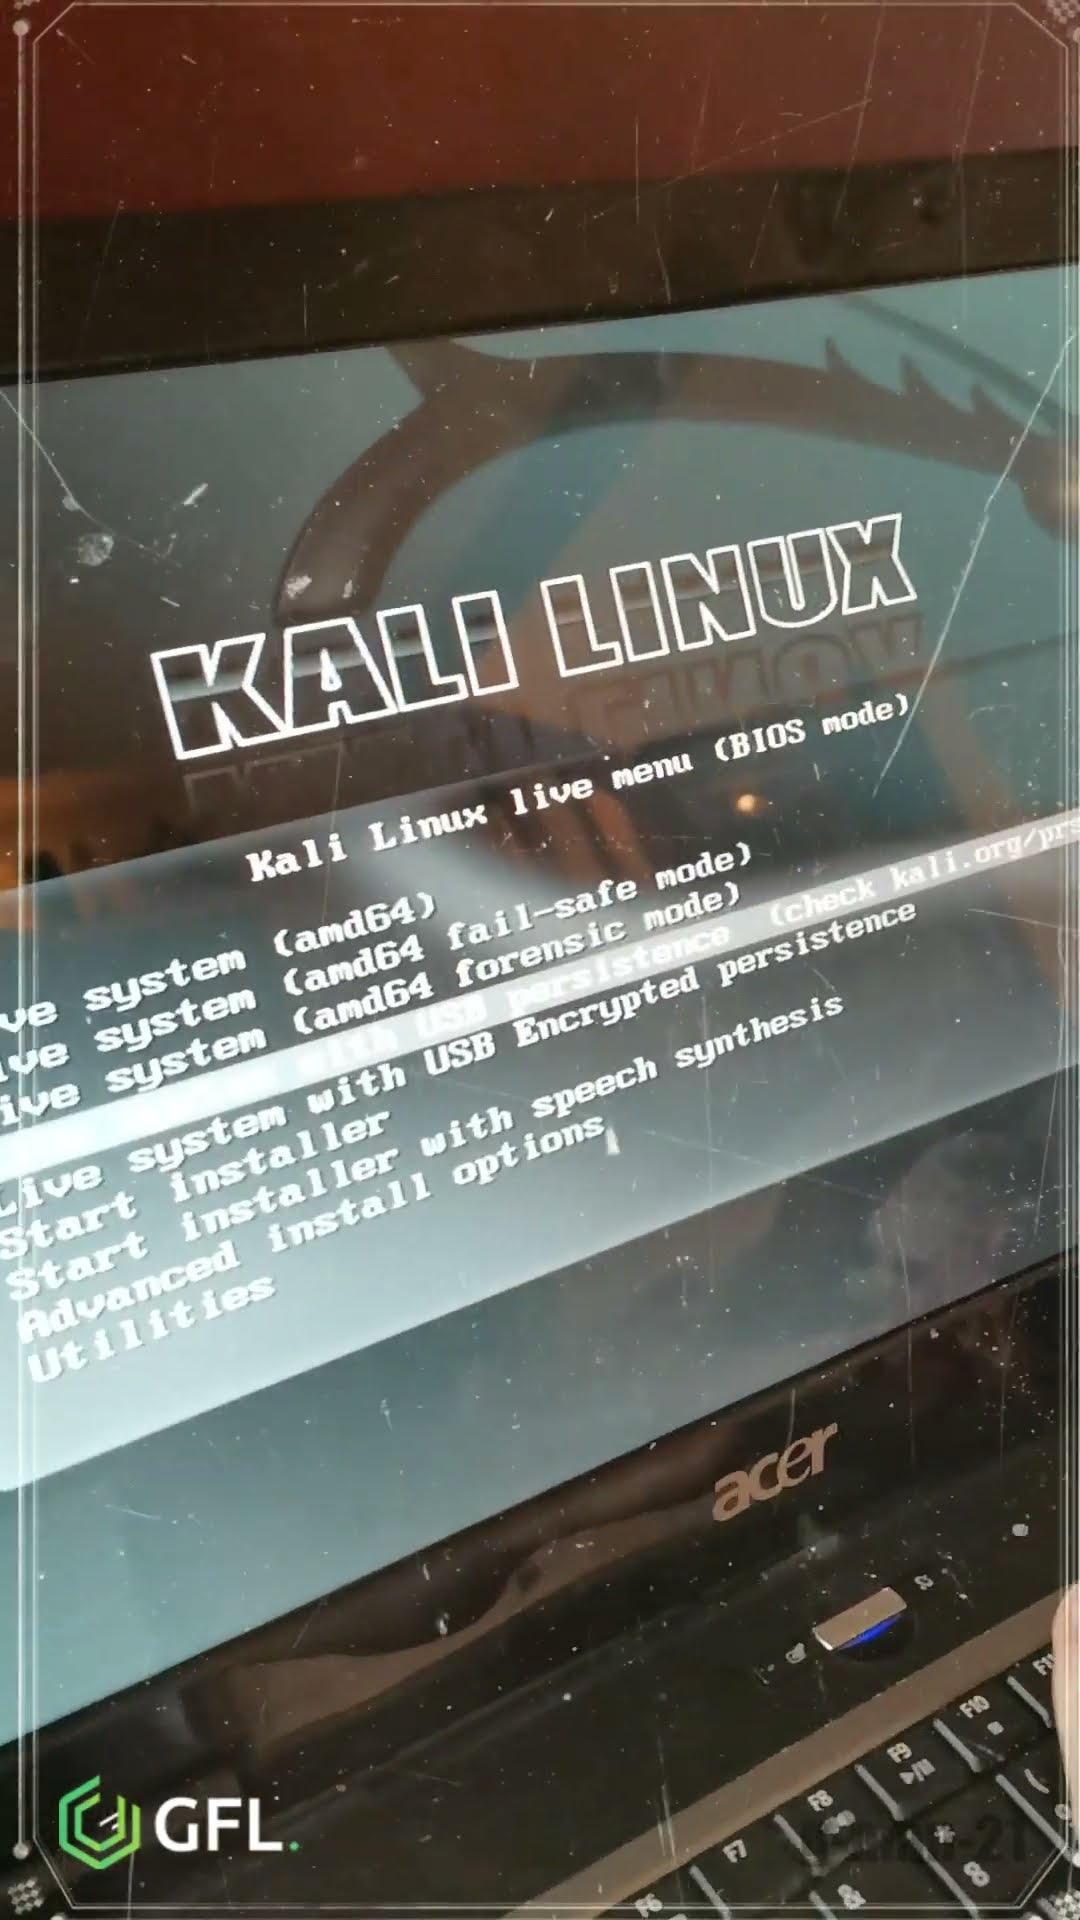 WHY I LOVE LINUX (It will SAVE your laptop) #kalilinux #Linuxdistribution #linux